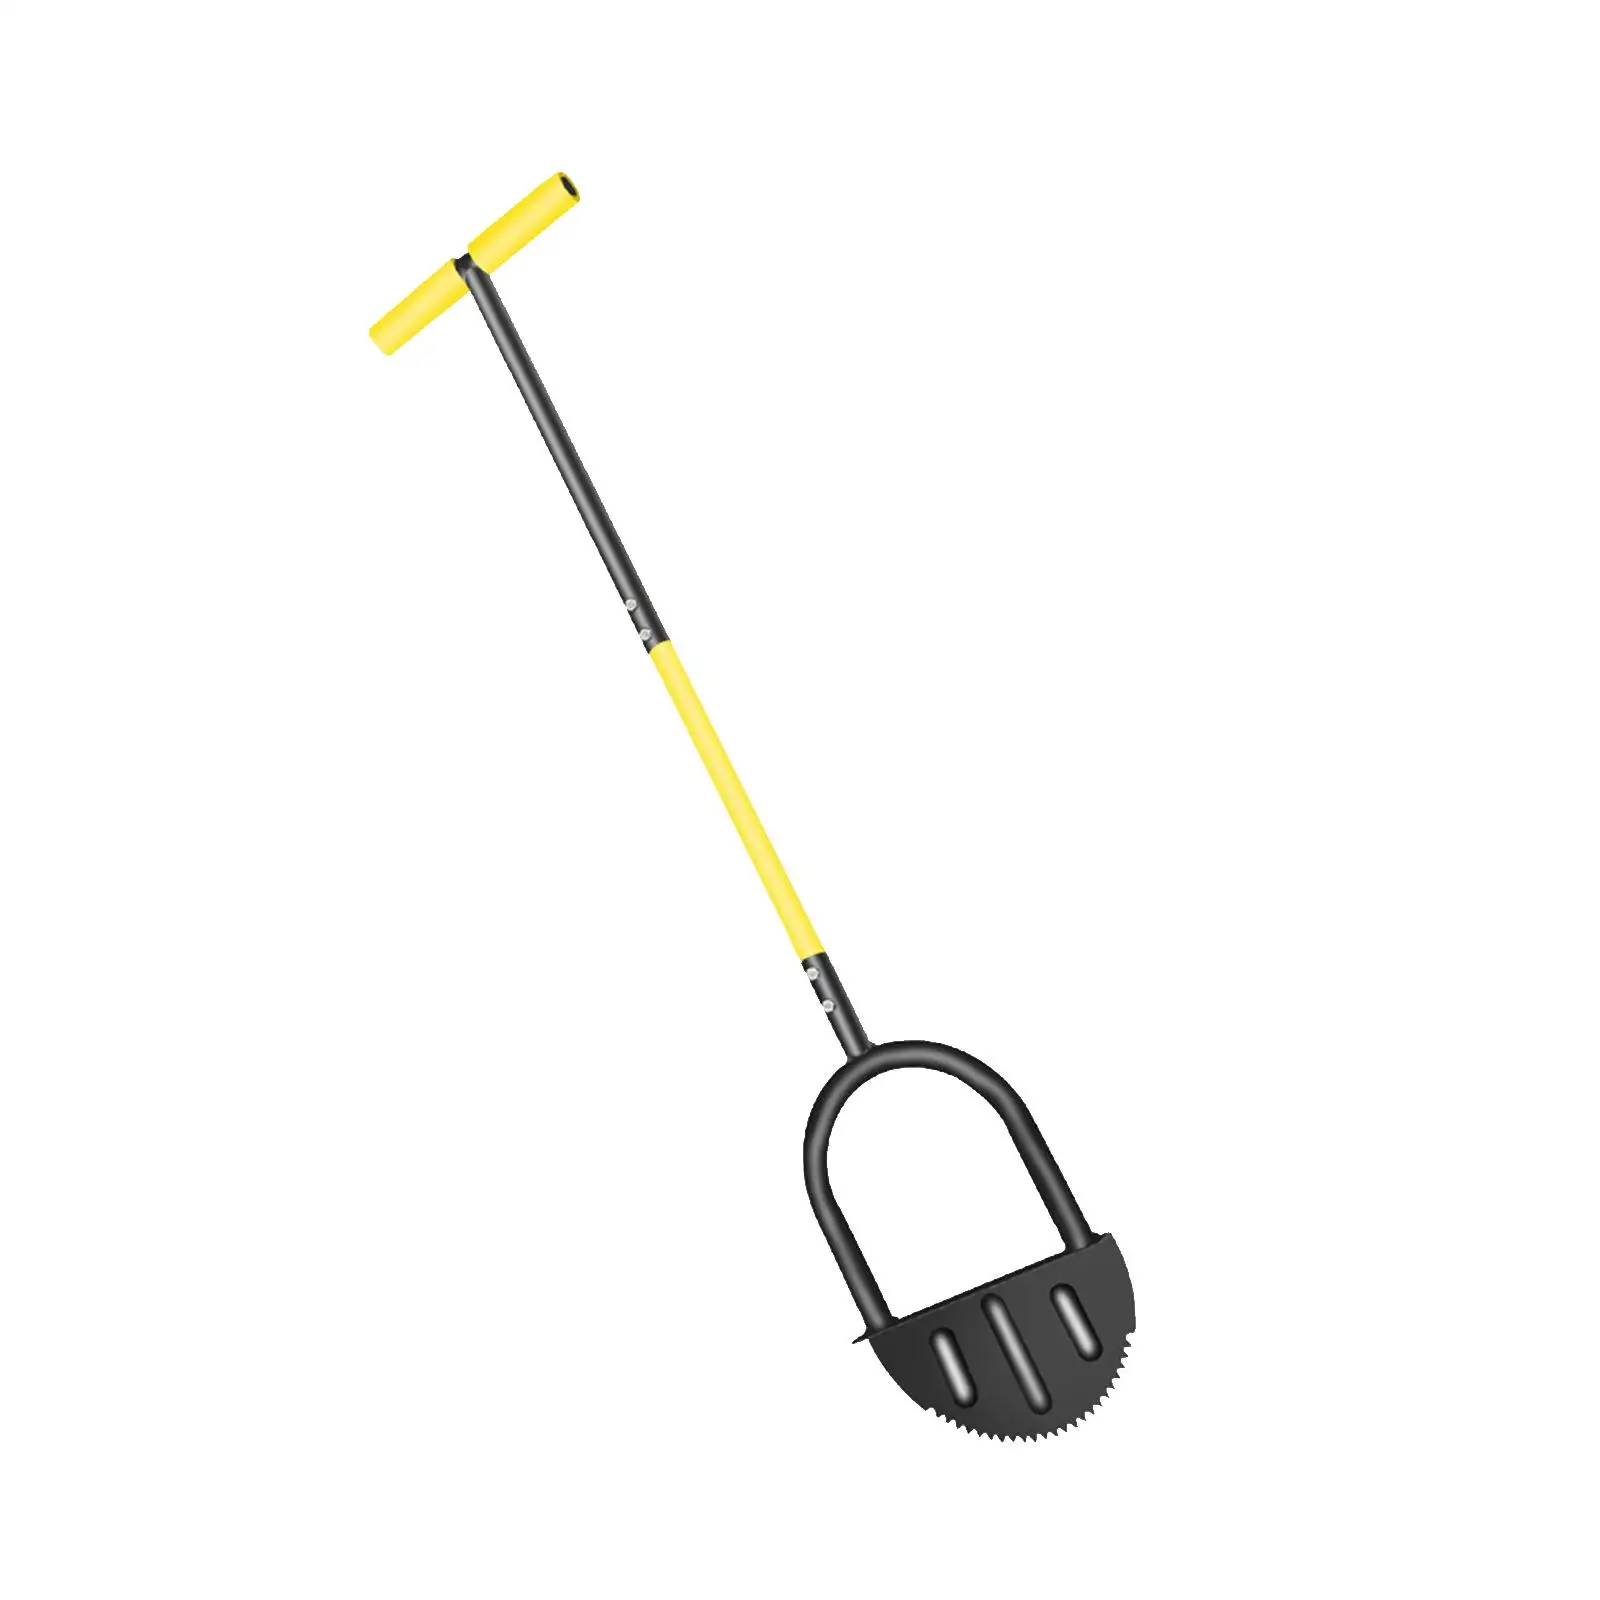 Manual Edger Edging Tool Trimming Shovel Steel Half Moon Edger Saw Tooth Edger for Driveway Garden Flower Beds